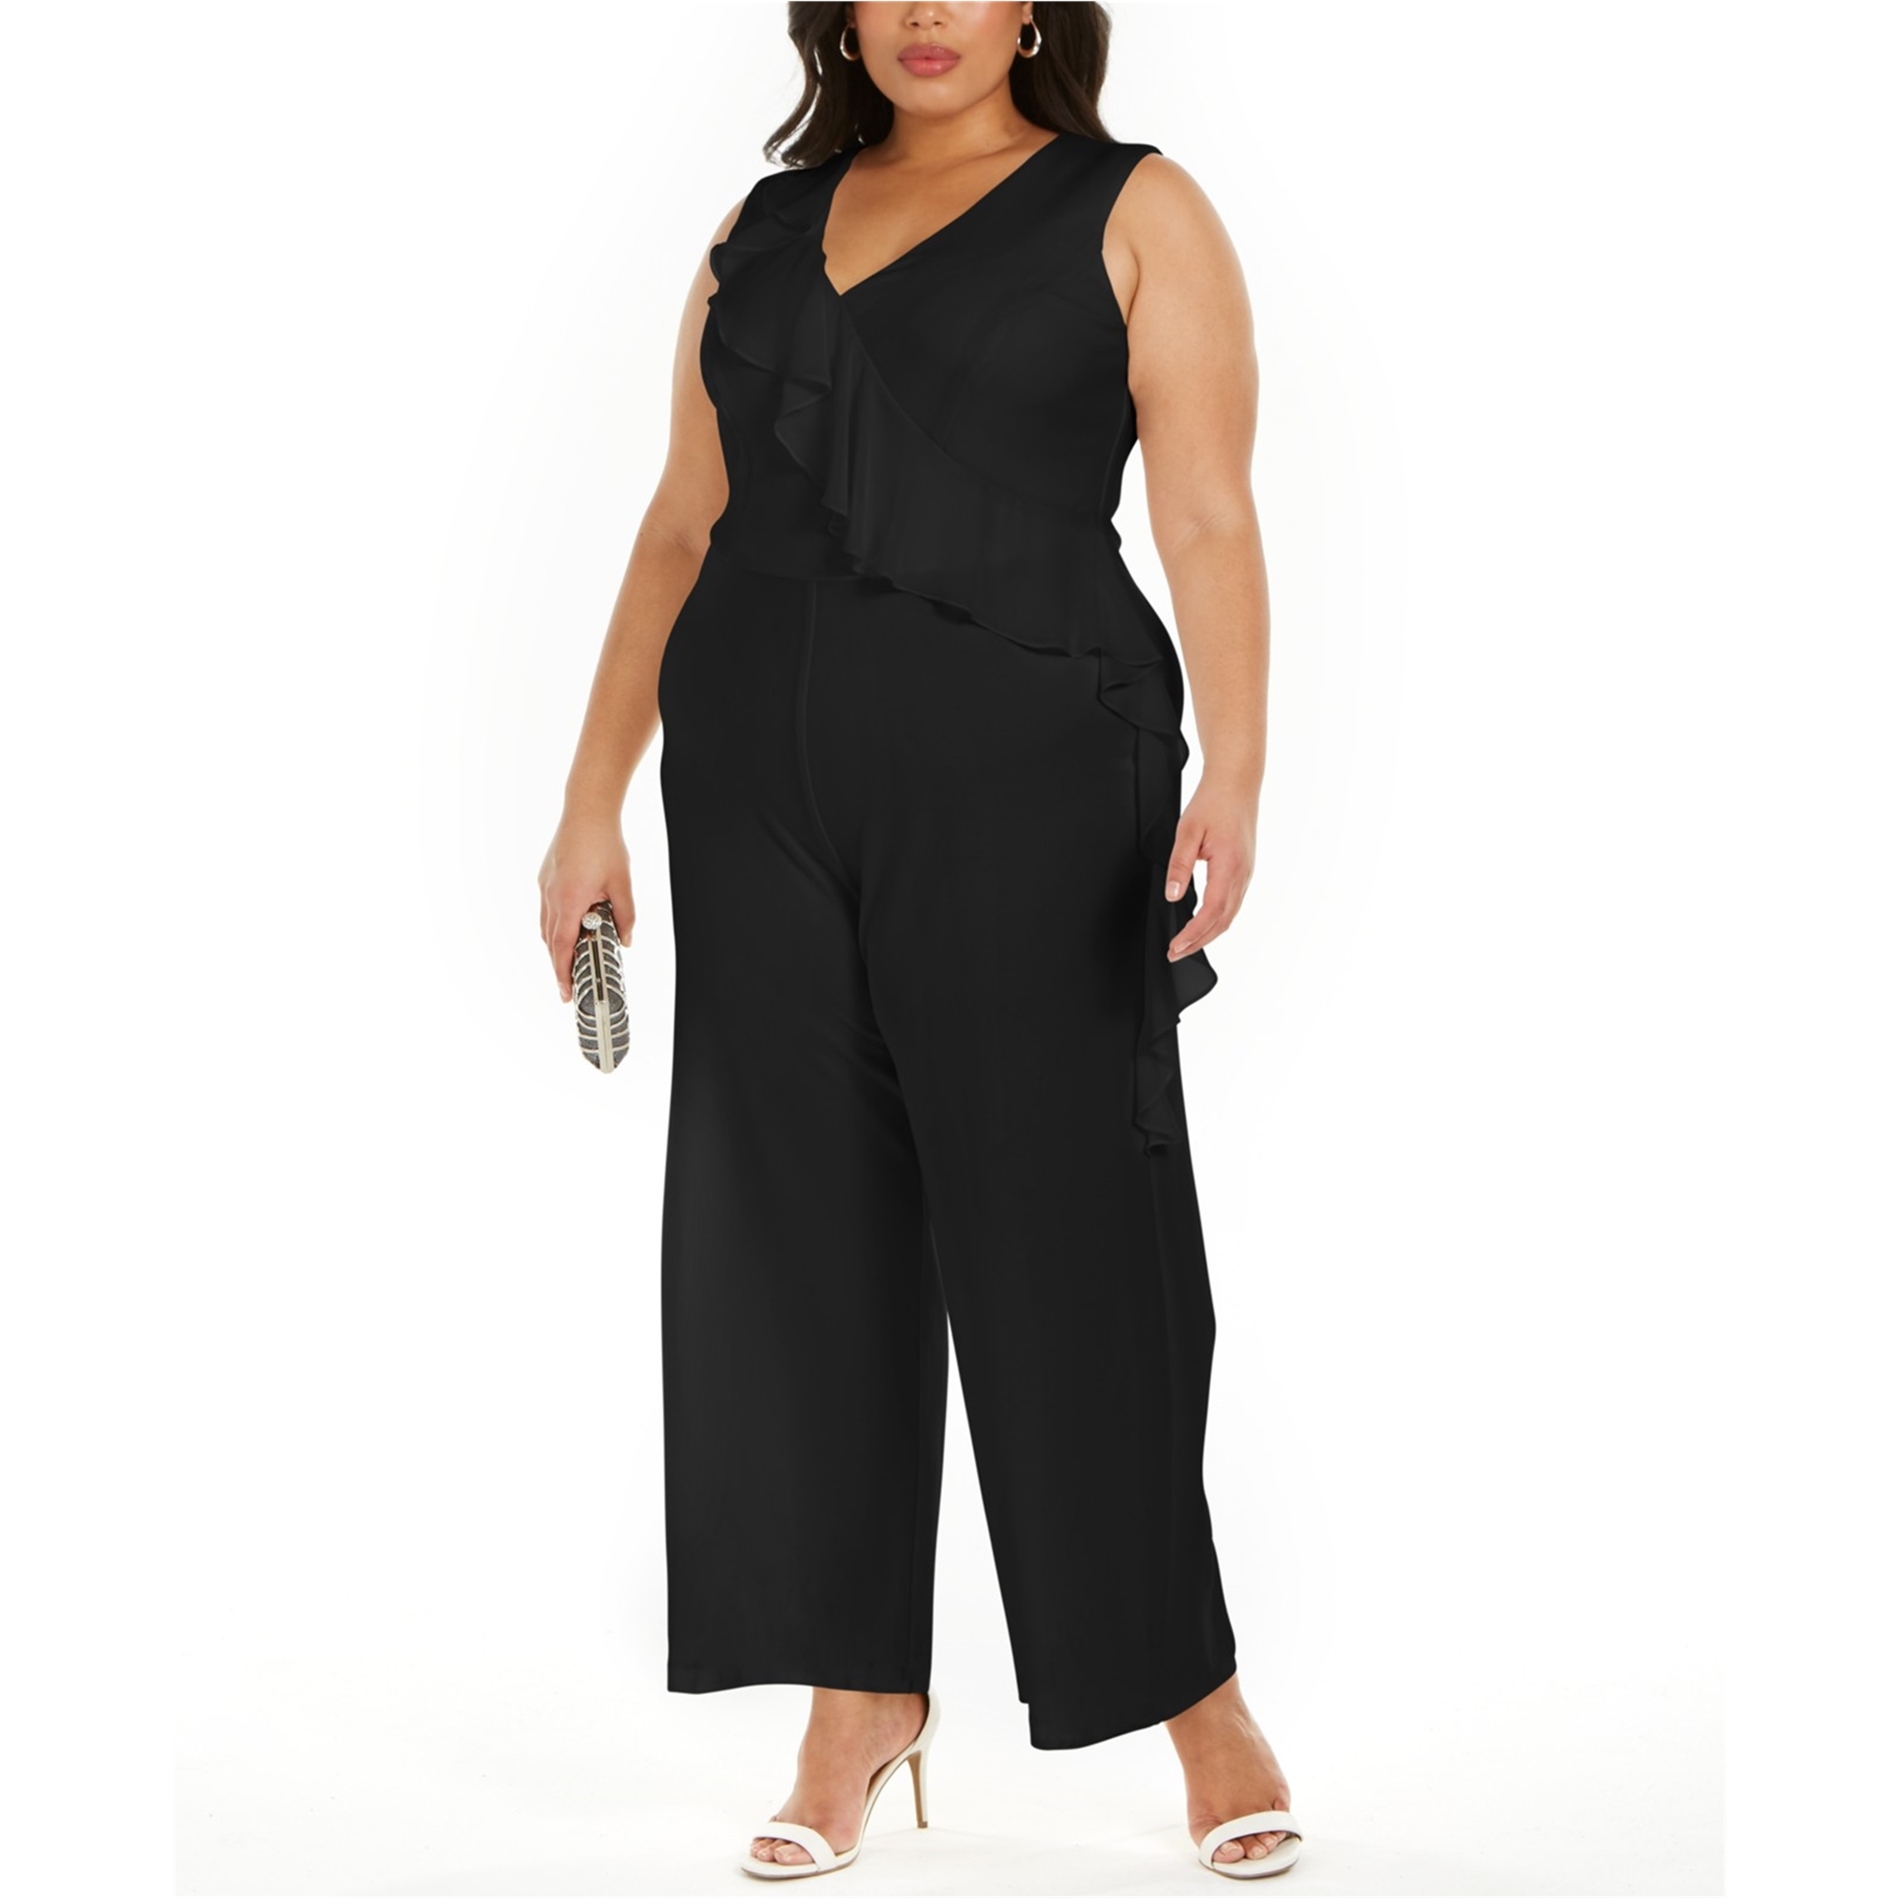 Connected Womens Ruffled Wide Leg Jumpsuit